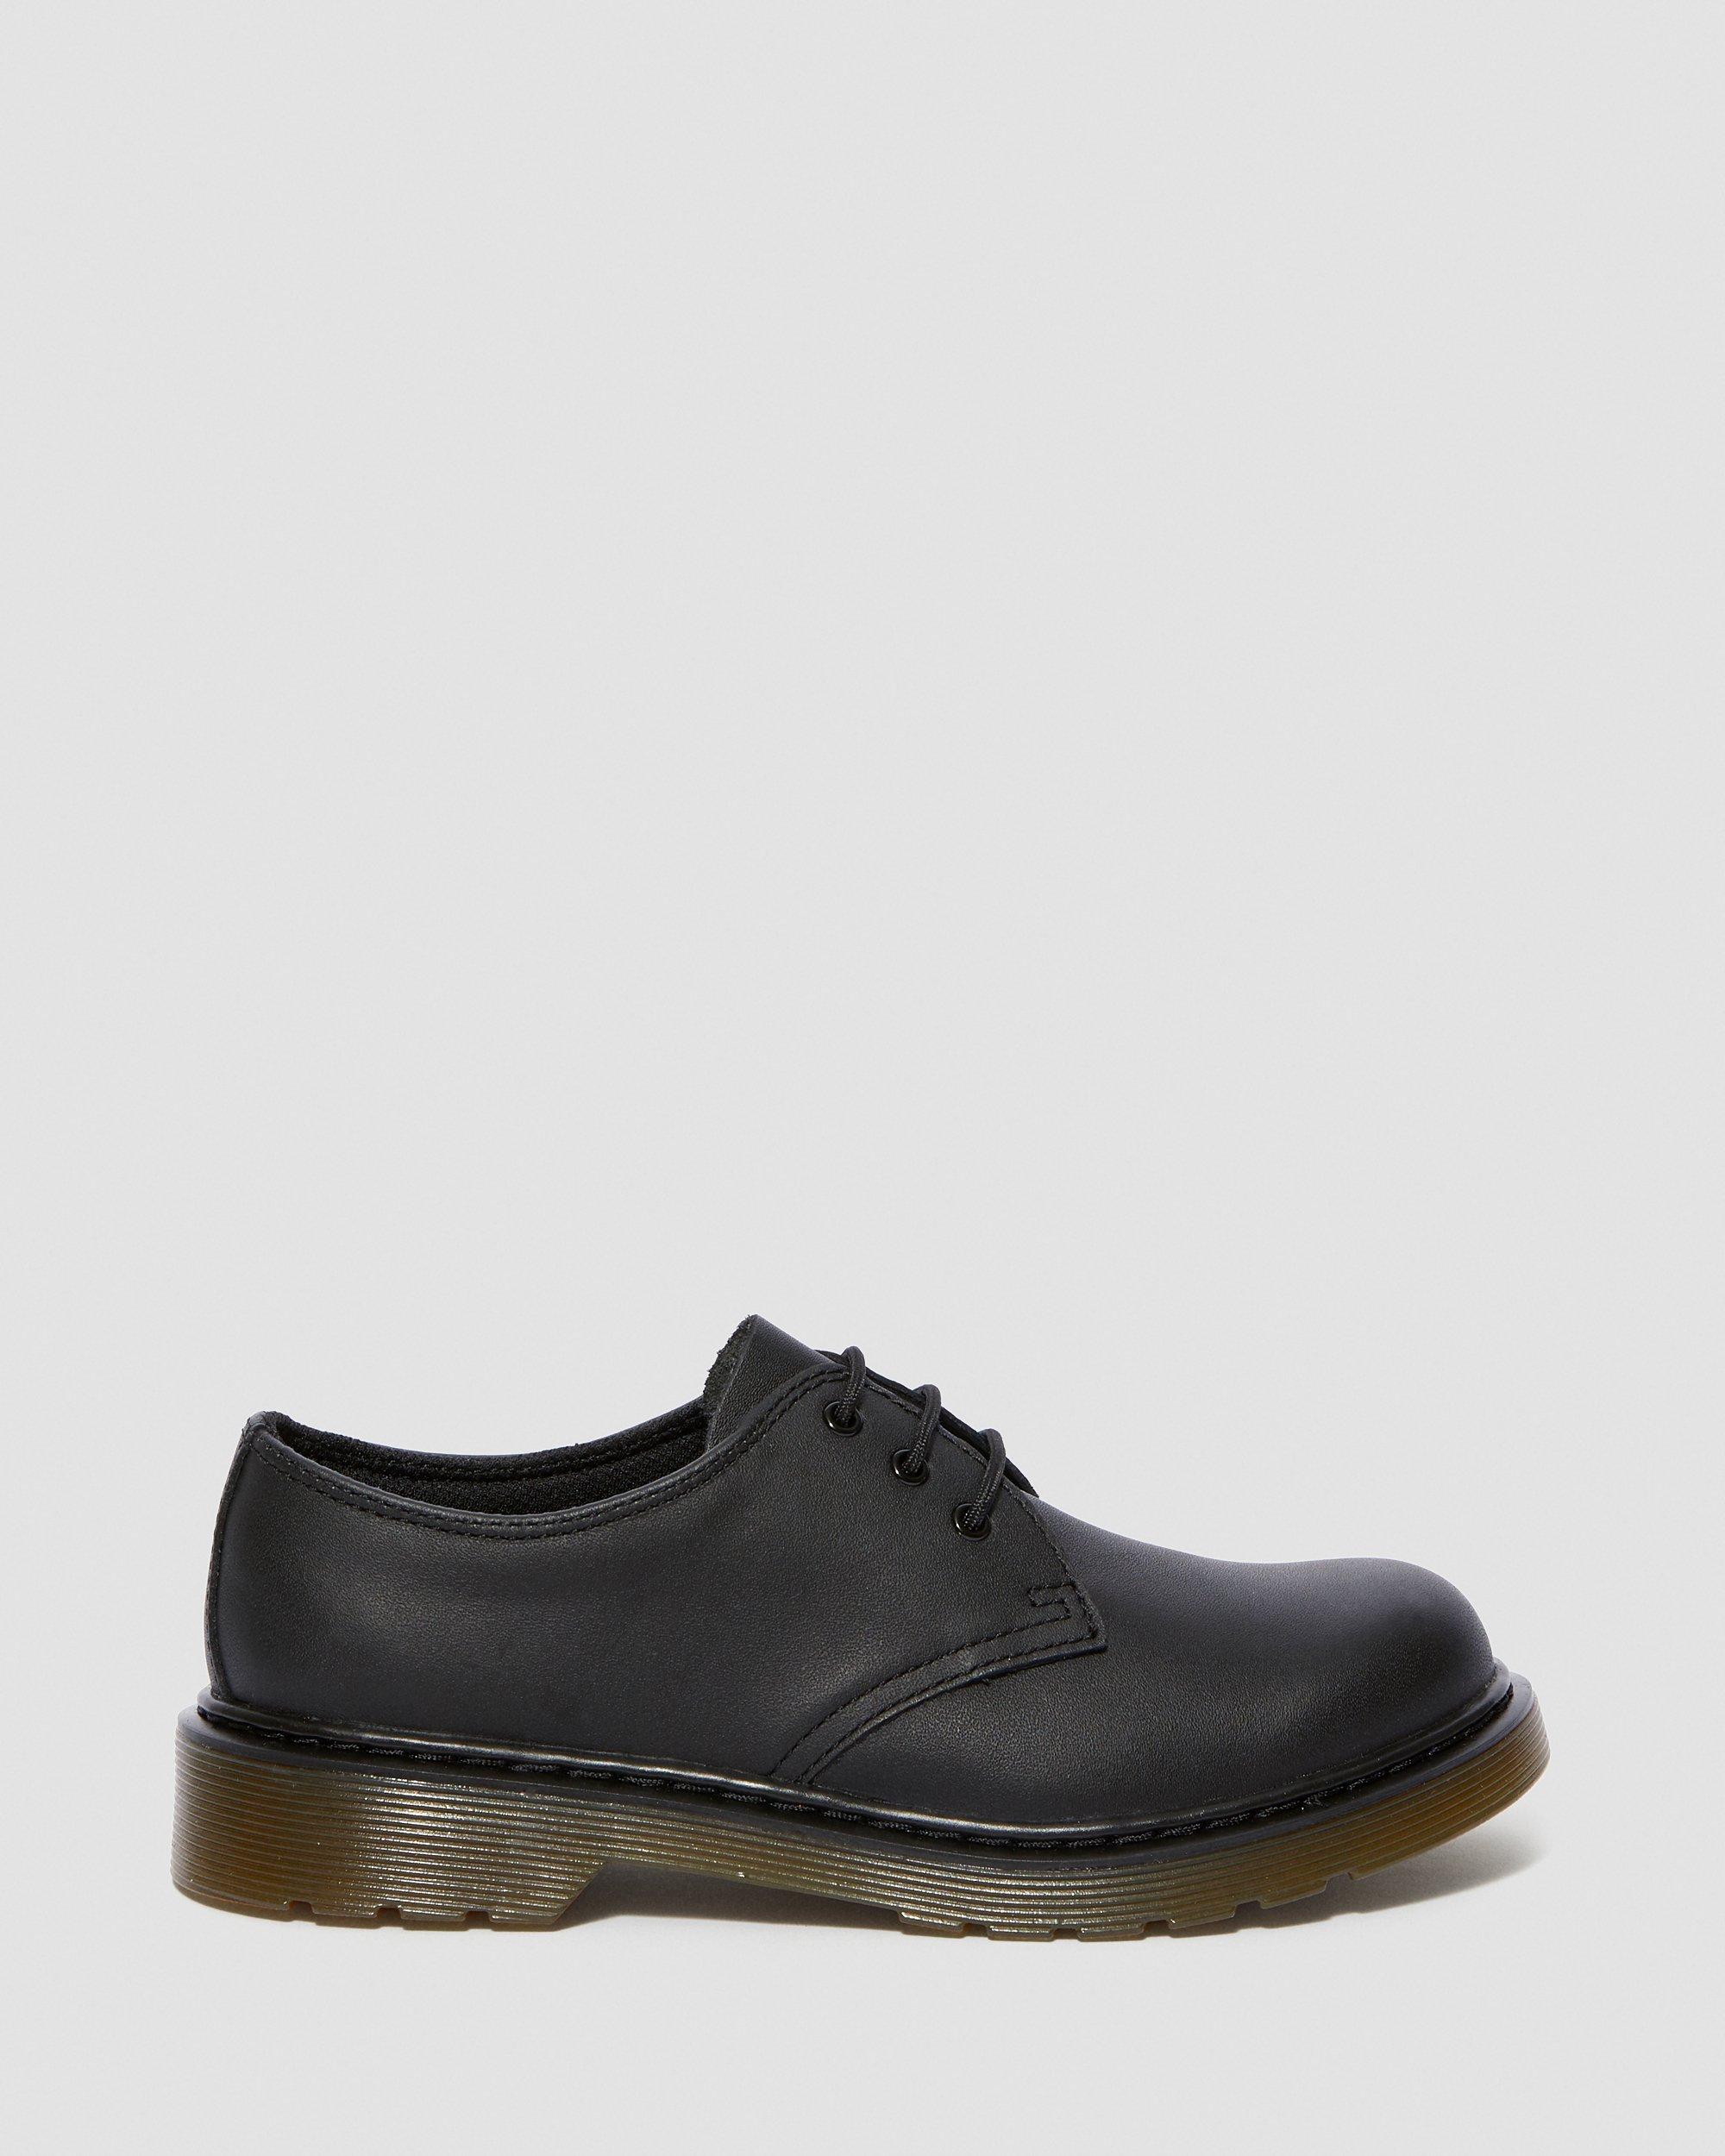 1461 YOUTH LEATHER SHOES | Dr. Martens UK